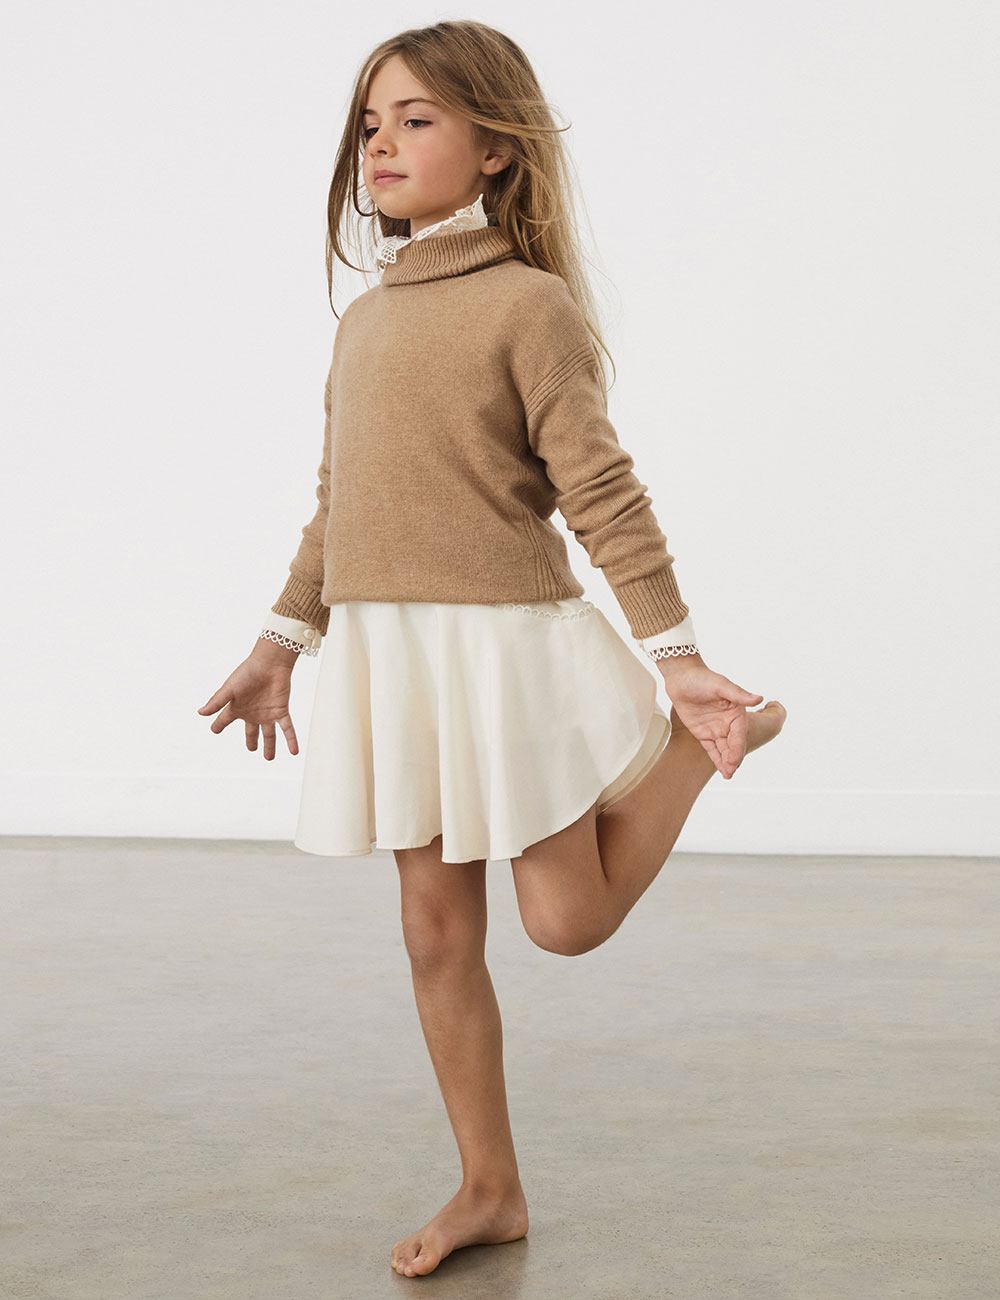 Young girl stood on one leg wearing beige Reiss jumper and white skirt